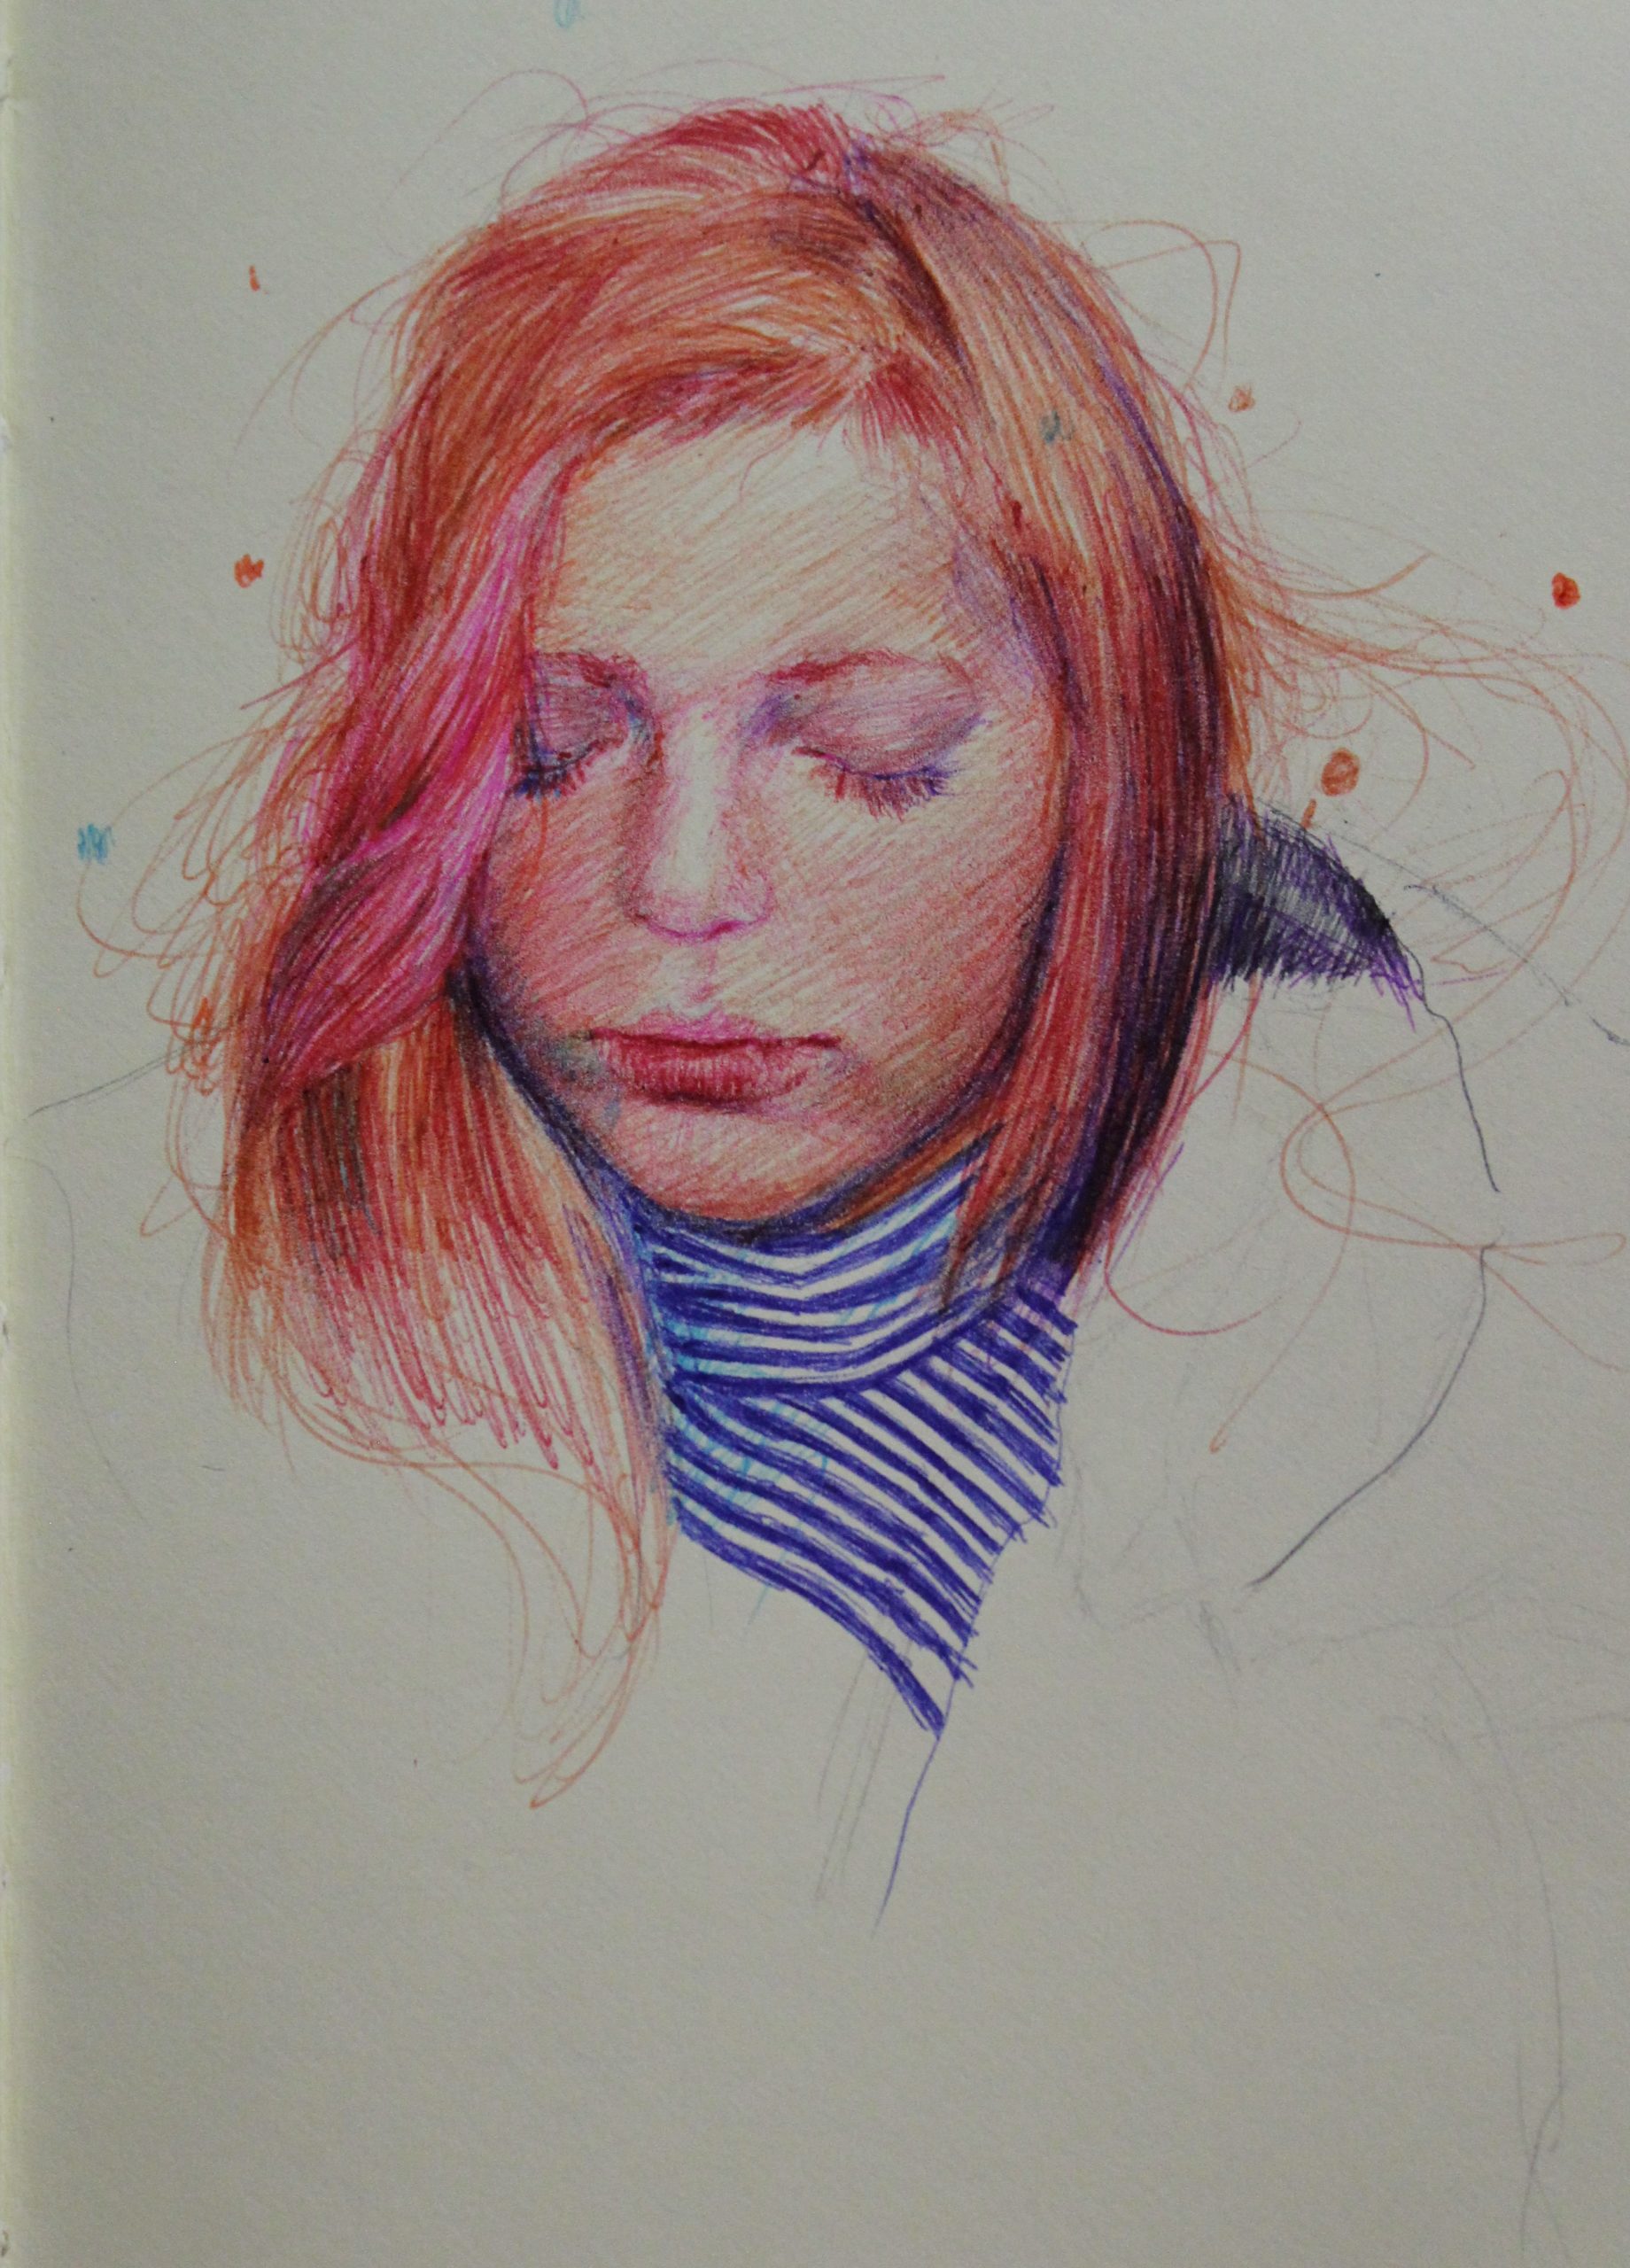 Ballpoint pen drawing of a woman's face